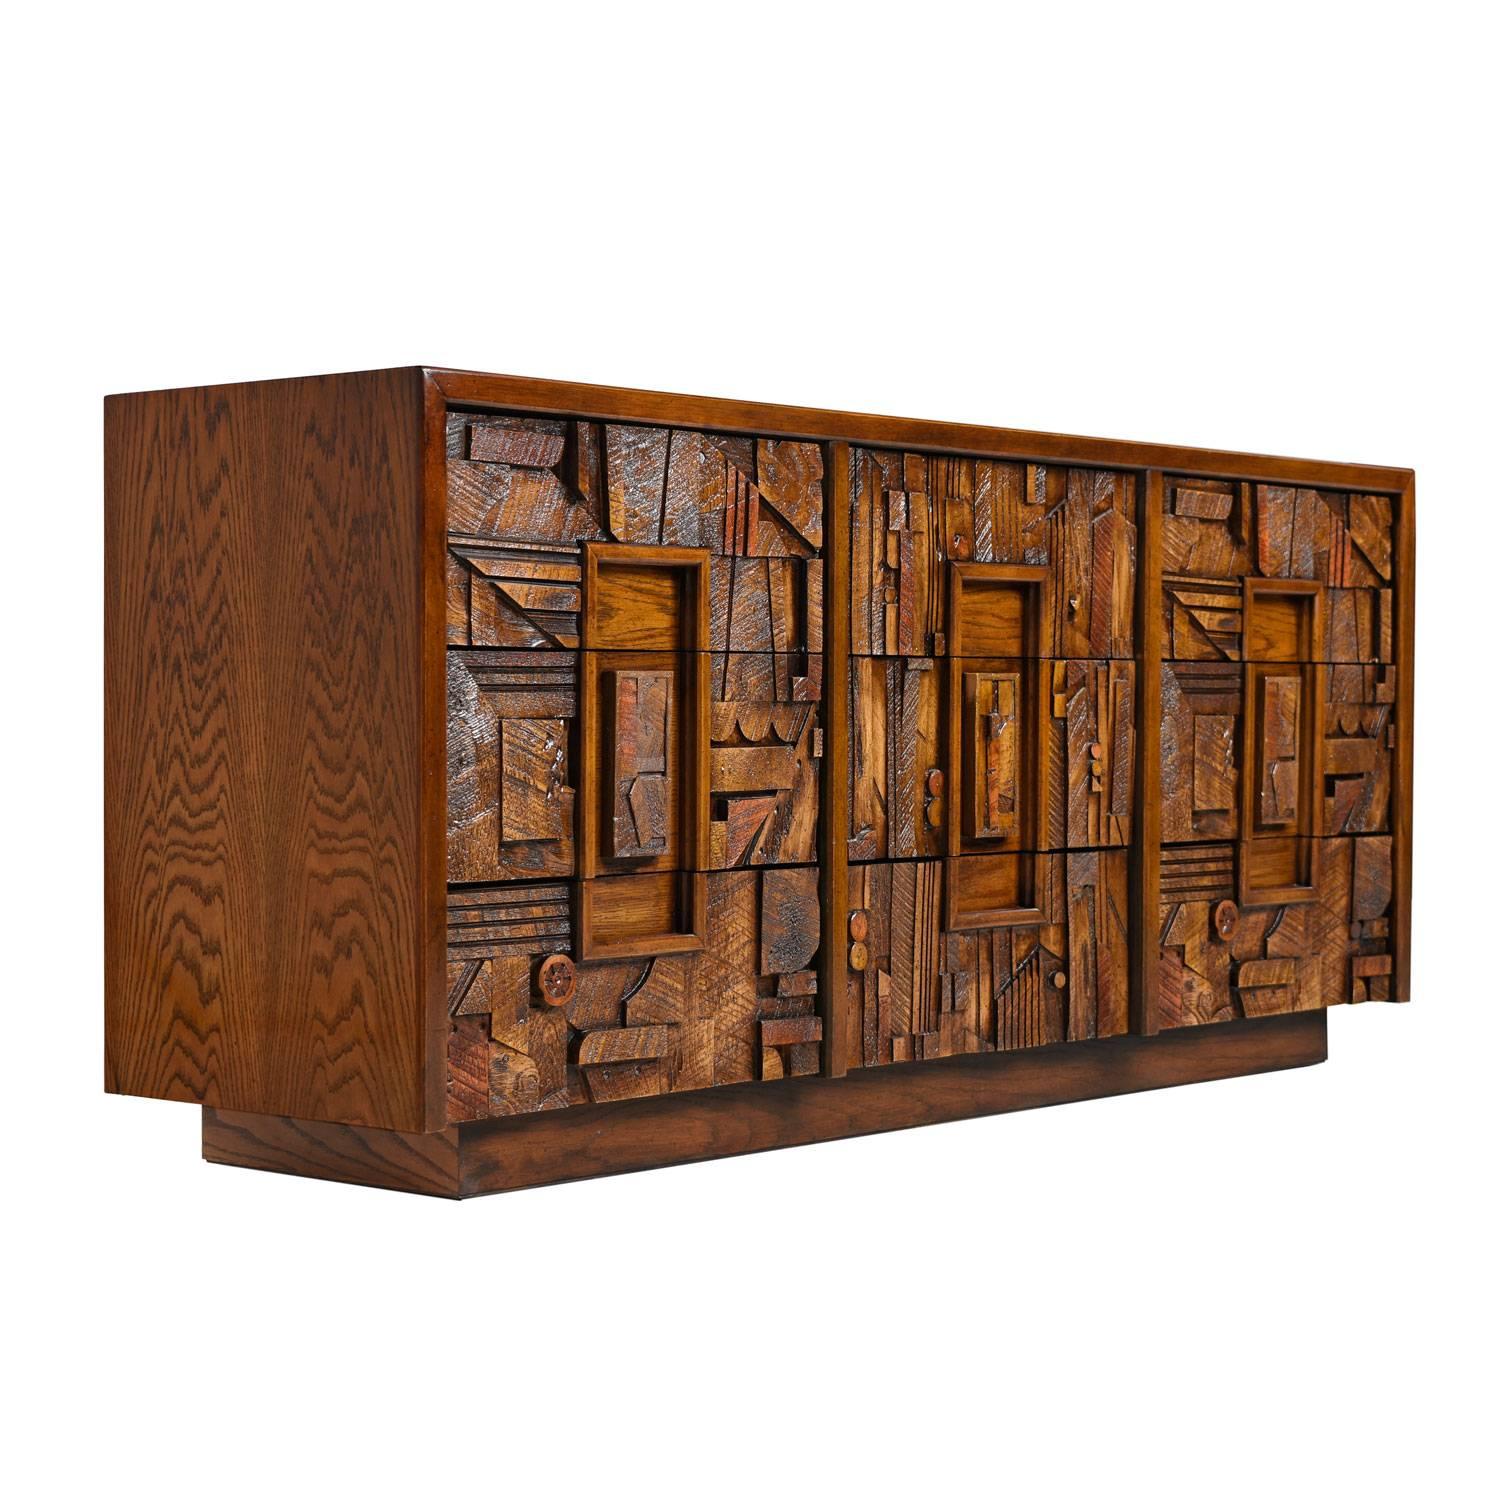 A vintage, 1970s, lane Brutalist triple dresser. A highly textured pattern adorns the front facade. The rough hewn forms exemplify the Brutalist aesthetic. Ample storage with a total of nine spacious drawers. Complete your bedroom set with the